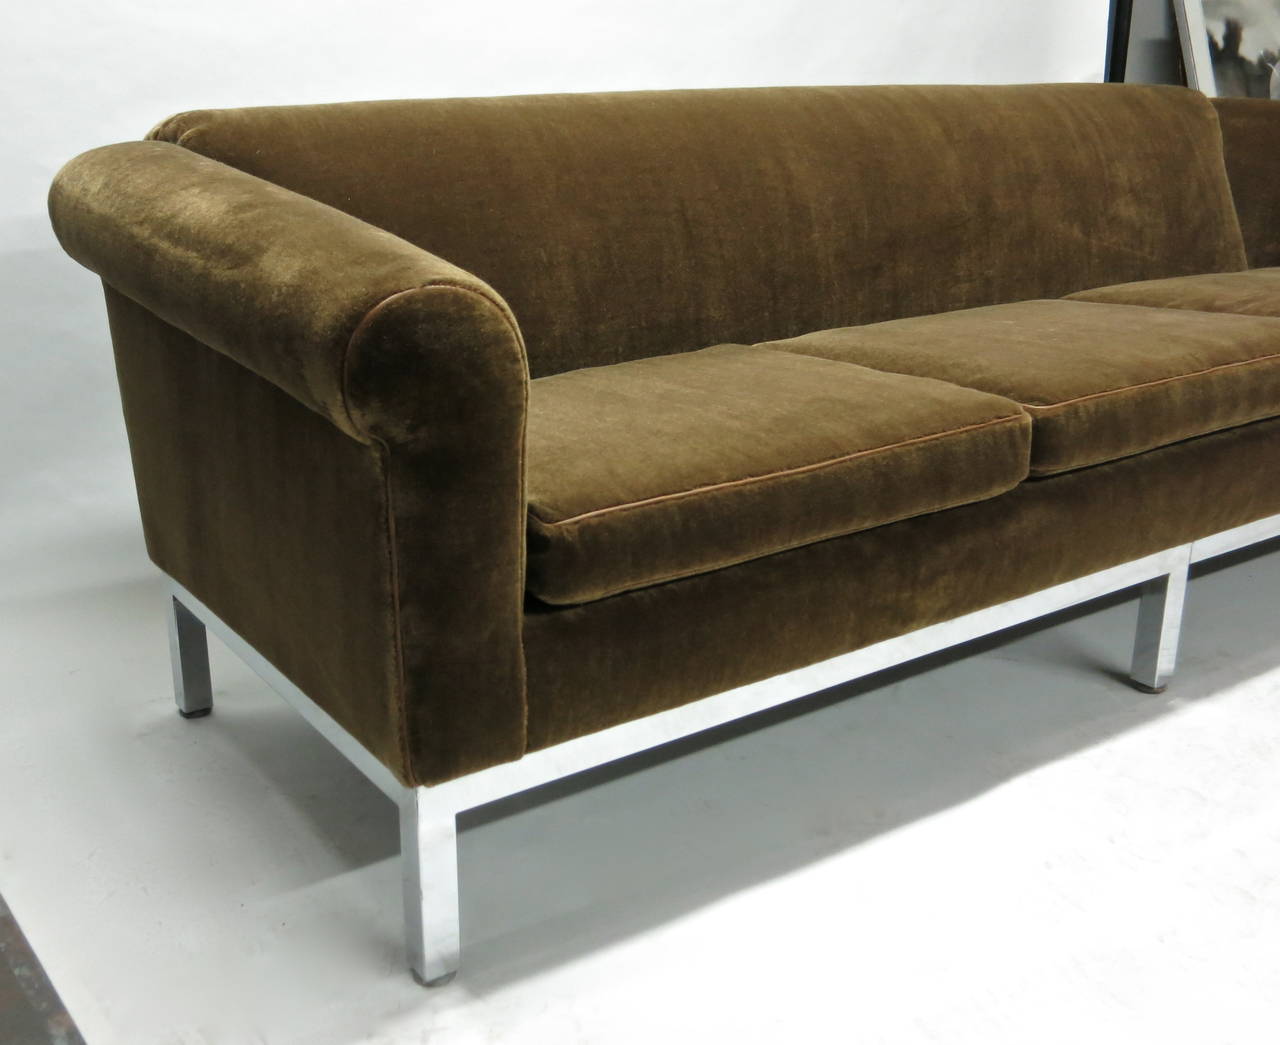 Mid-Century Modern Vintage Sofa Recently Upholstered in Brown Mohair Circa 1975 Made in USA